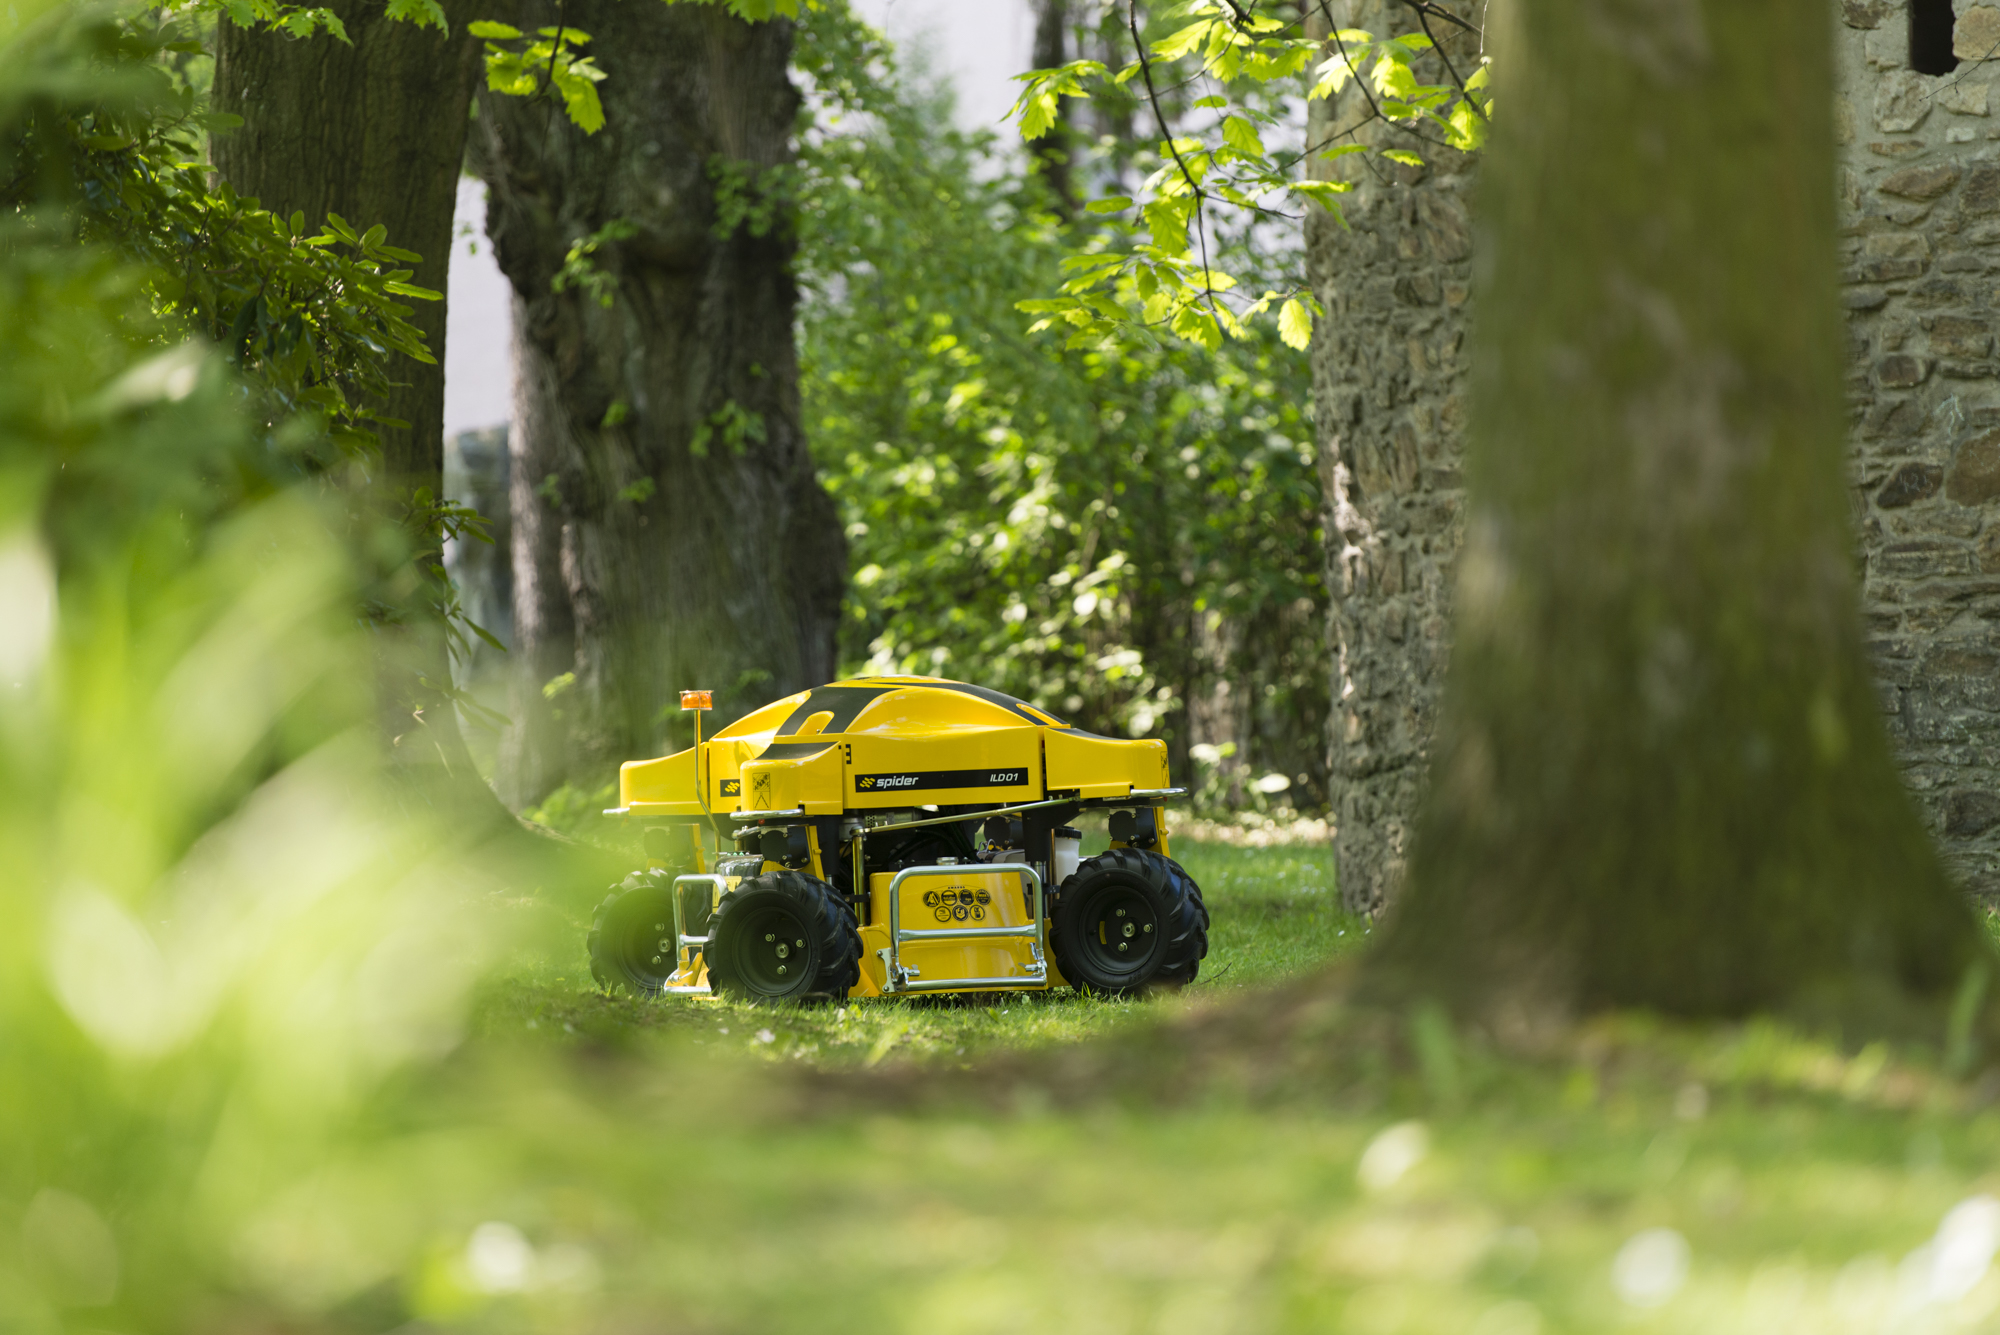 SPIDER ILD01 Mower Positioned on Grass in a Wooded Area